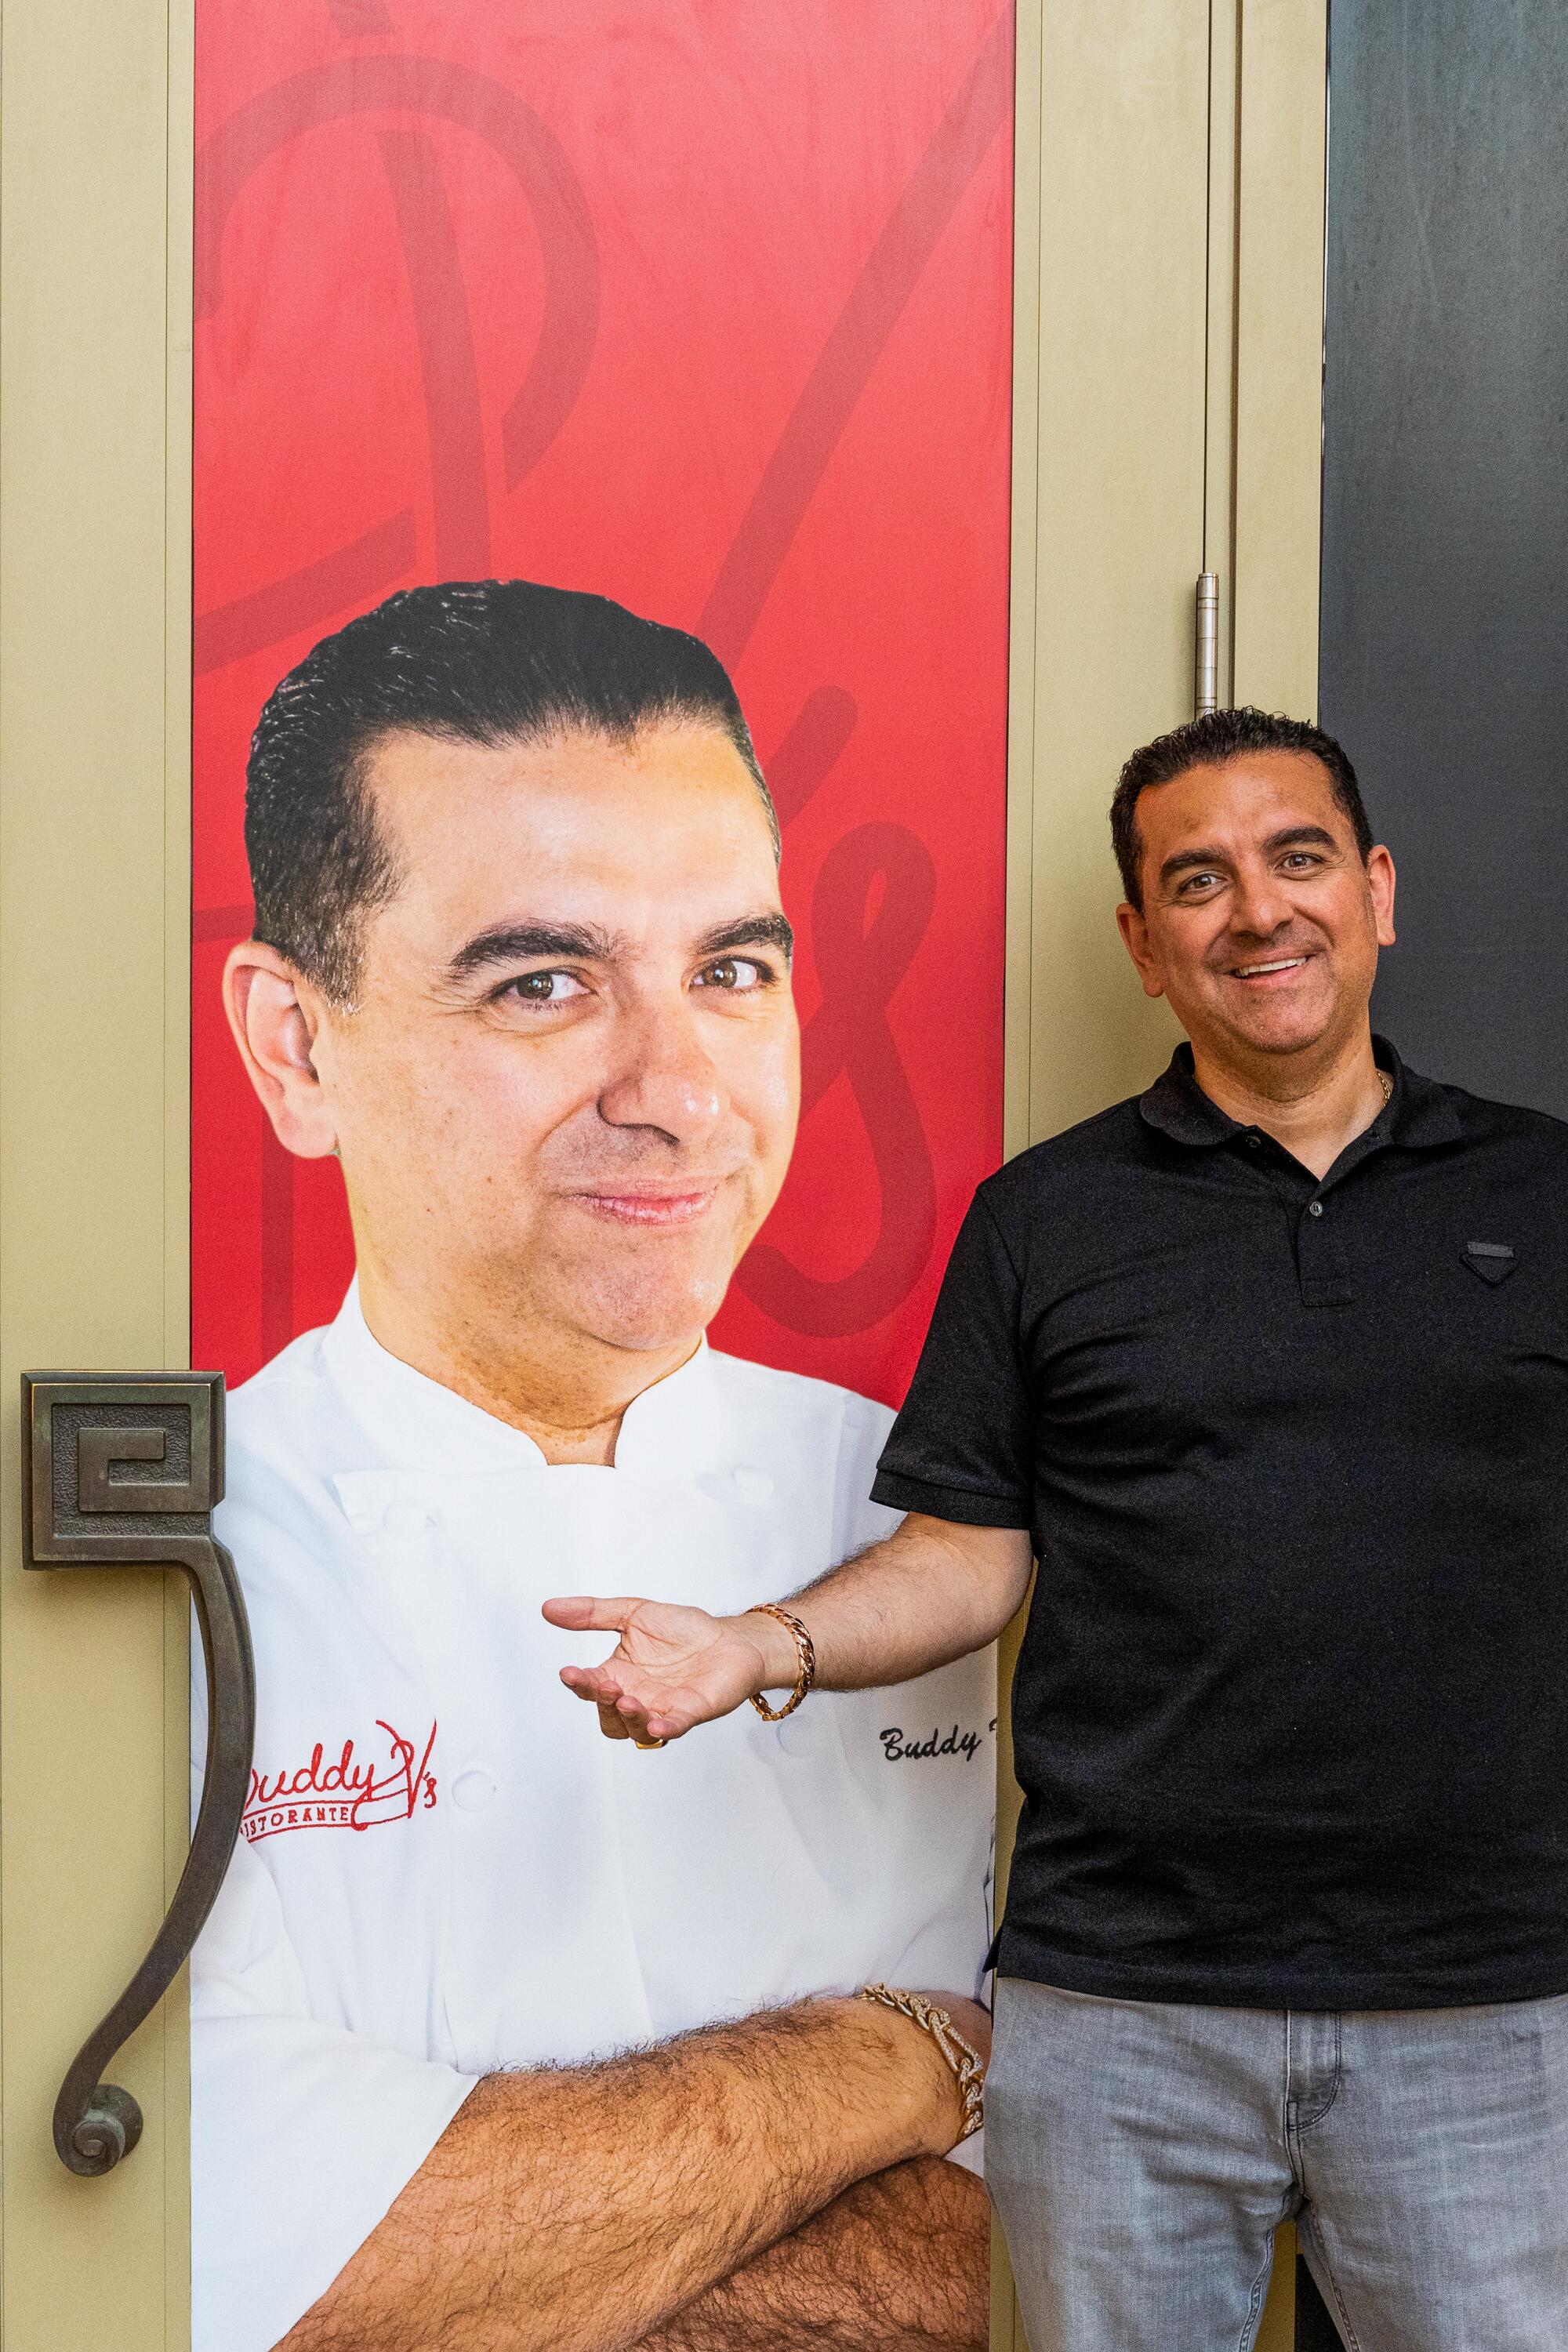 Buddy Valastro poses with a photo of himself outside the Venetian.